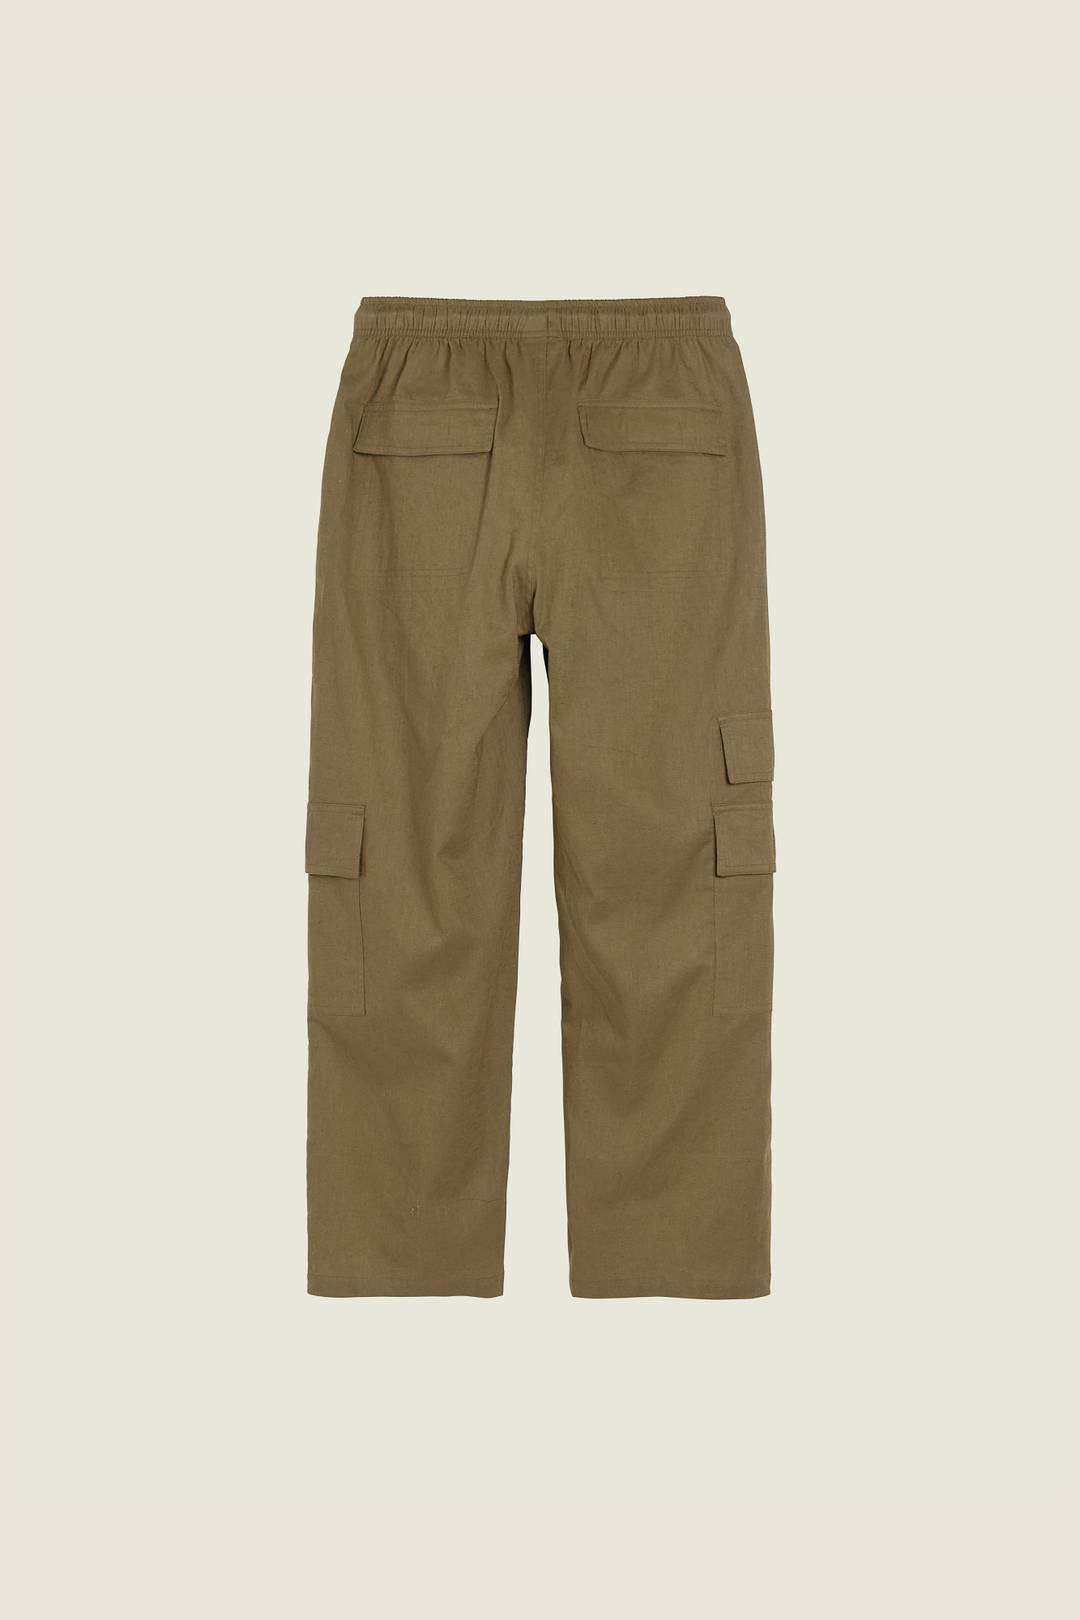 Cargo pants (Red) from Oas